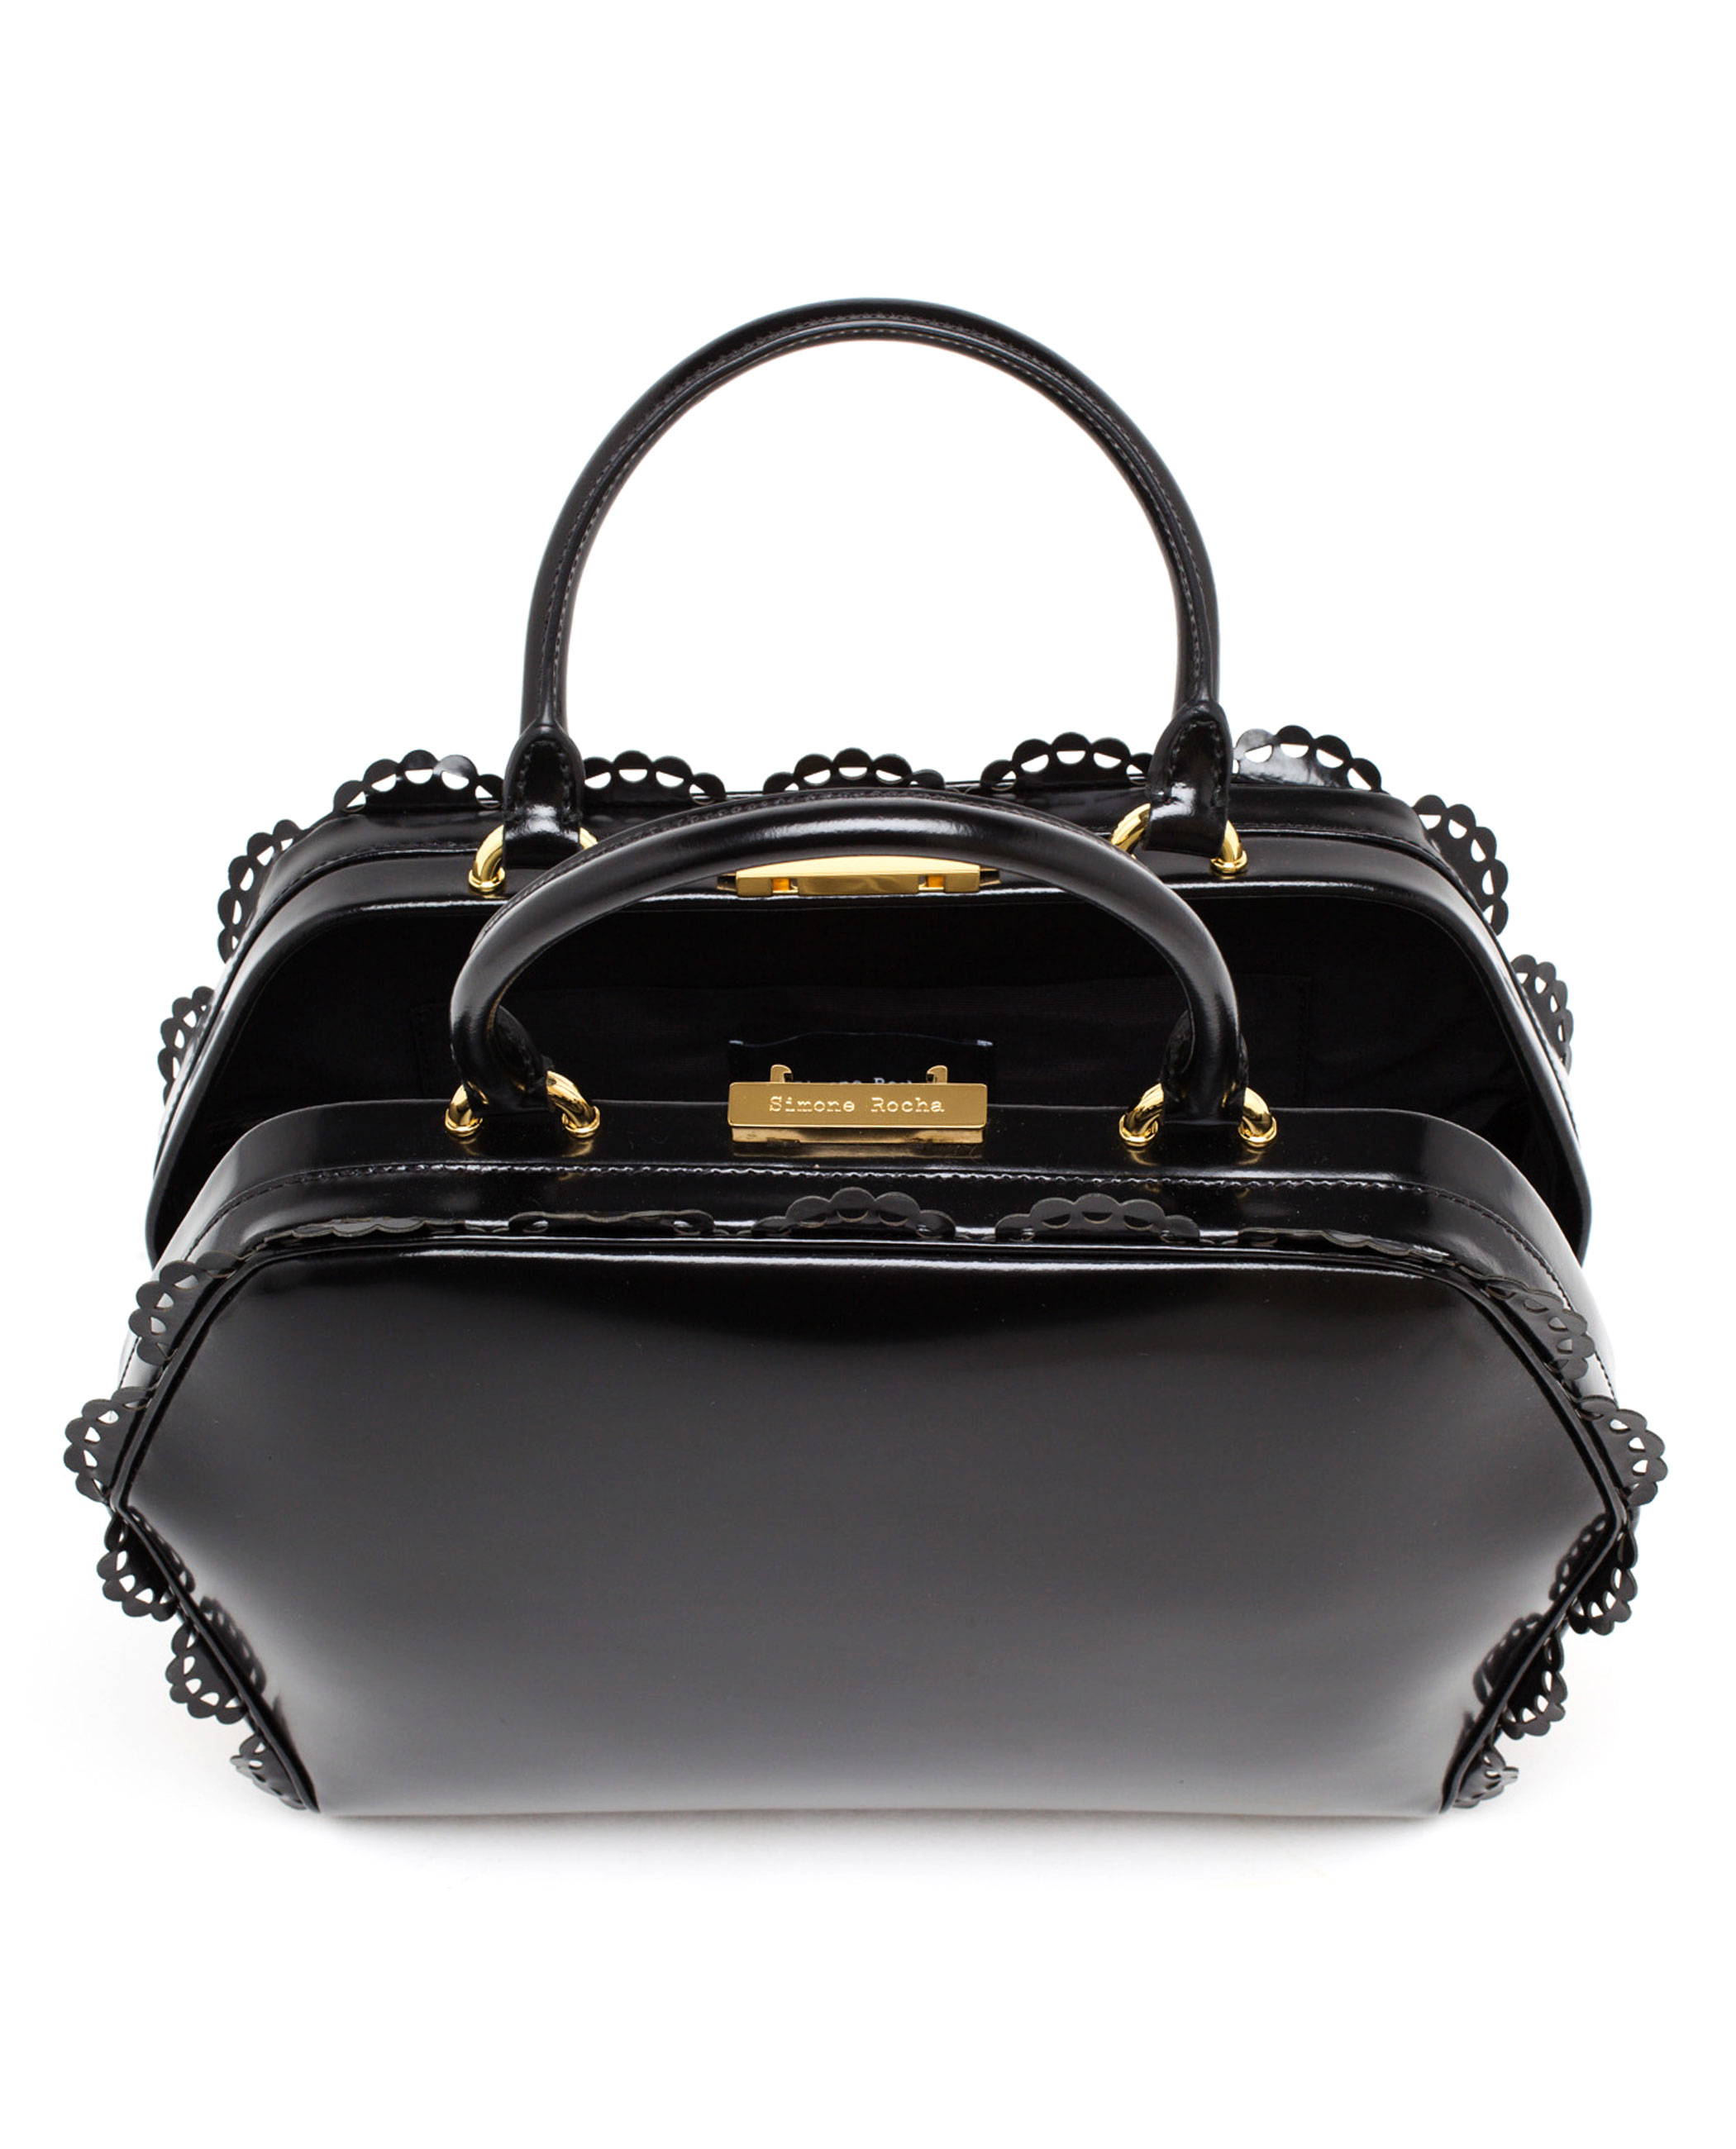 Lyst - Simone Rocha Scalloped Patent Leather Doctors Bag in Black